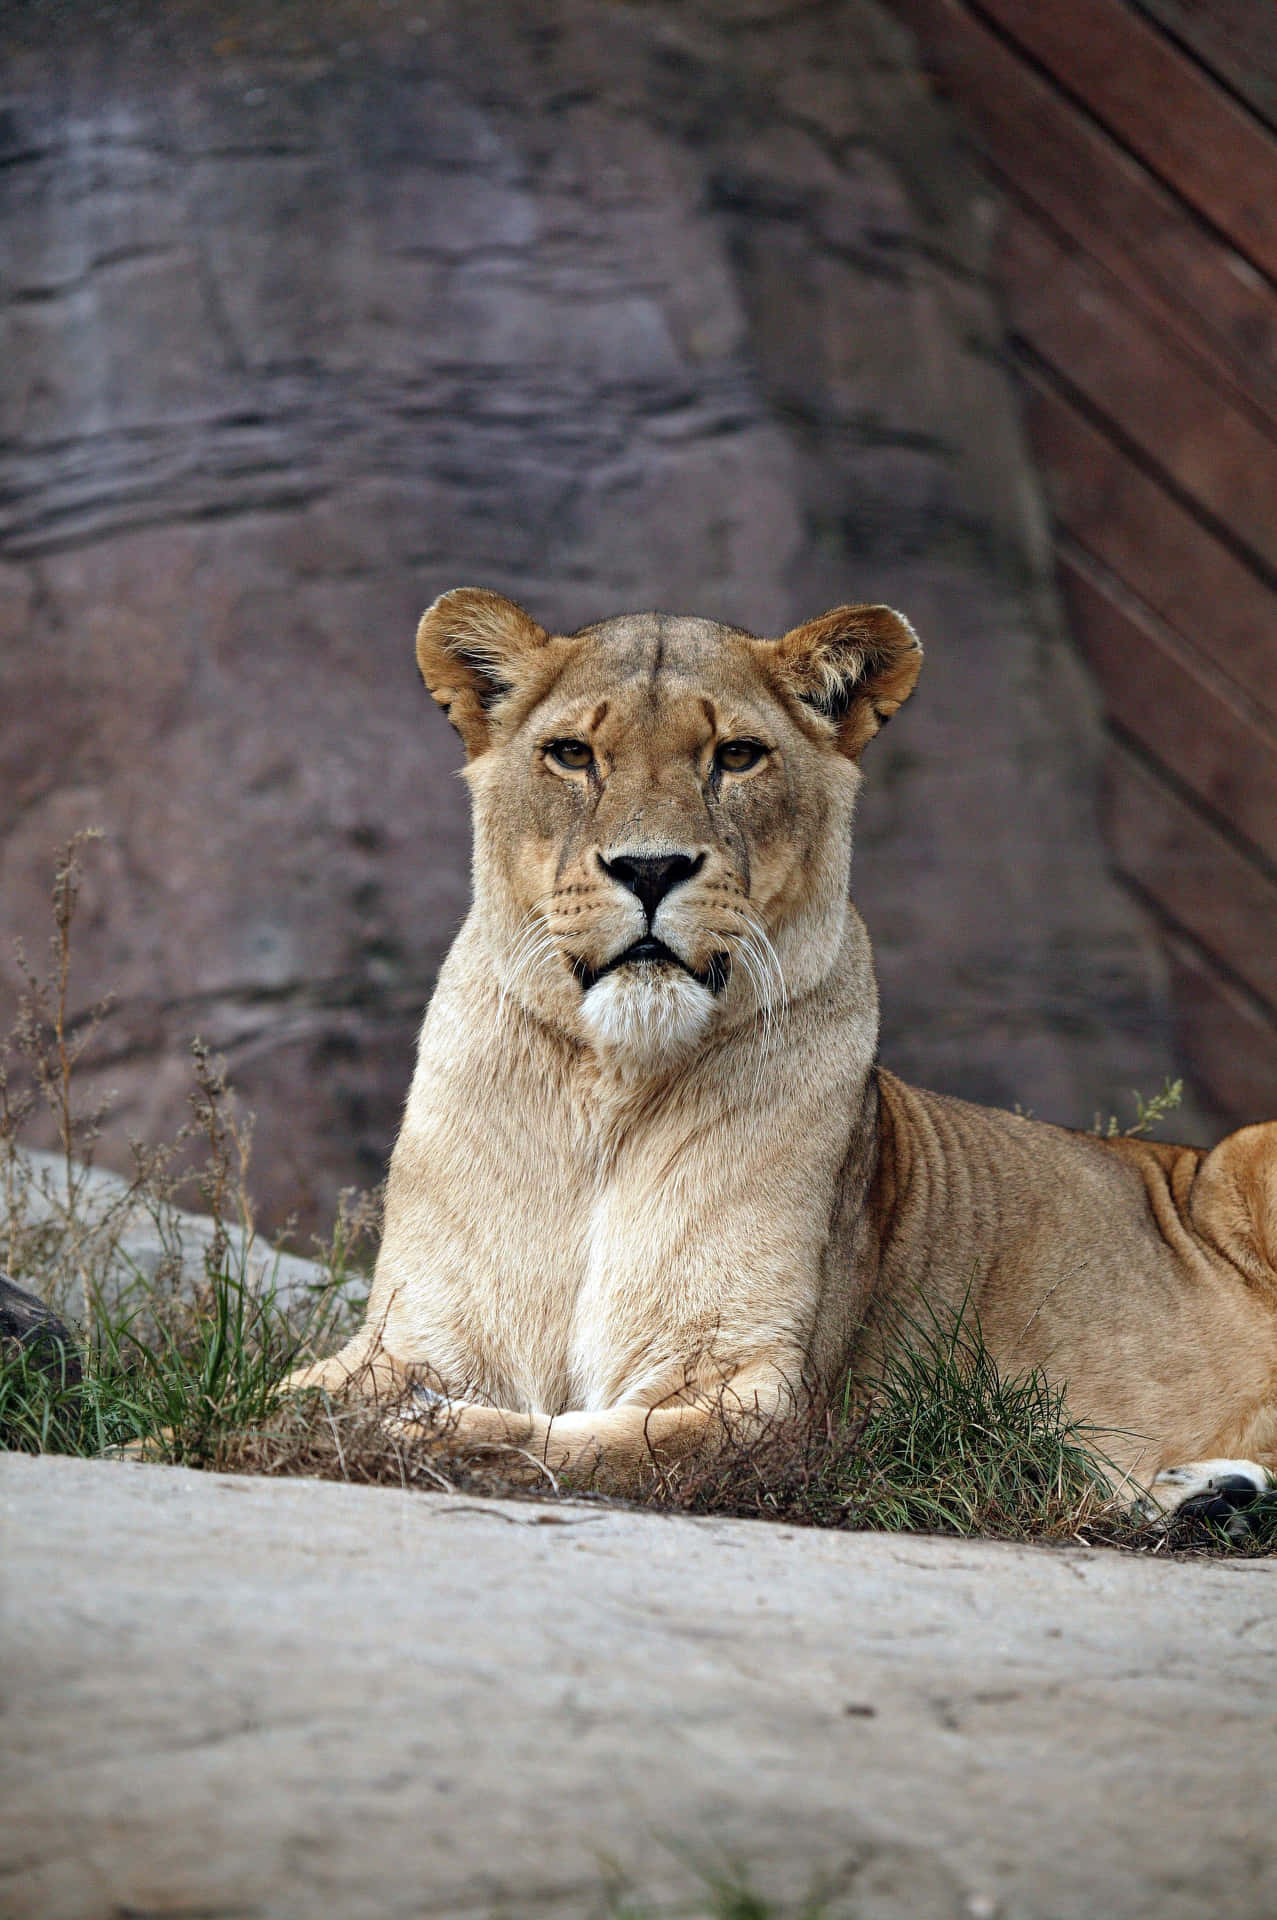 Lioness In A Zoo Wallpaper